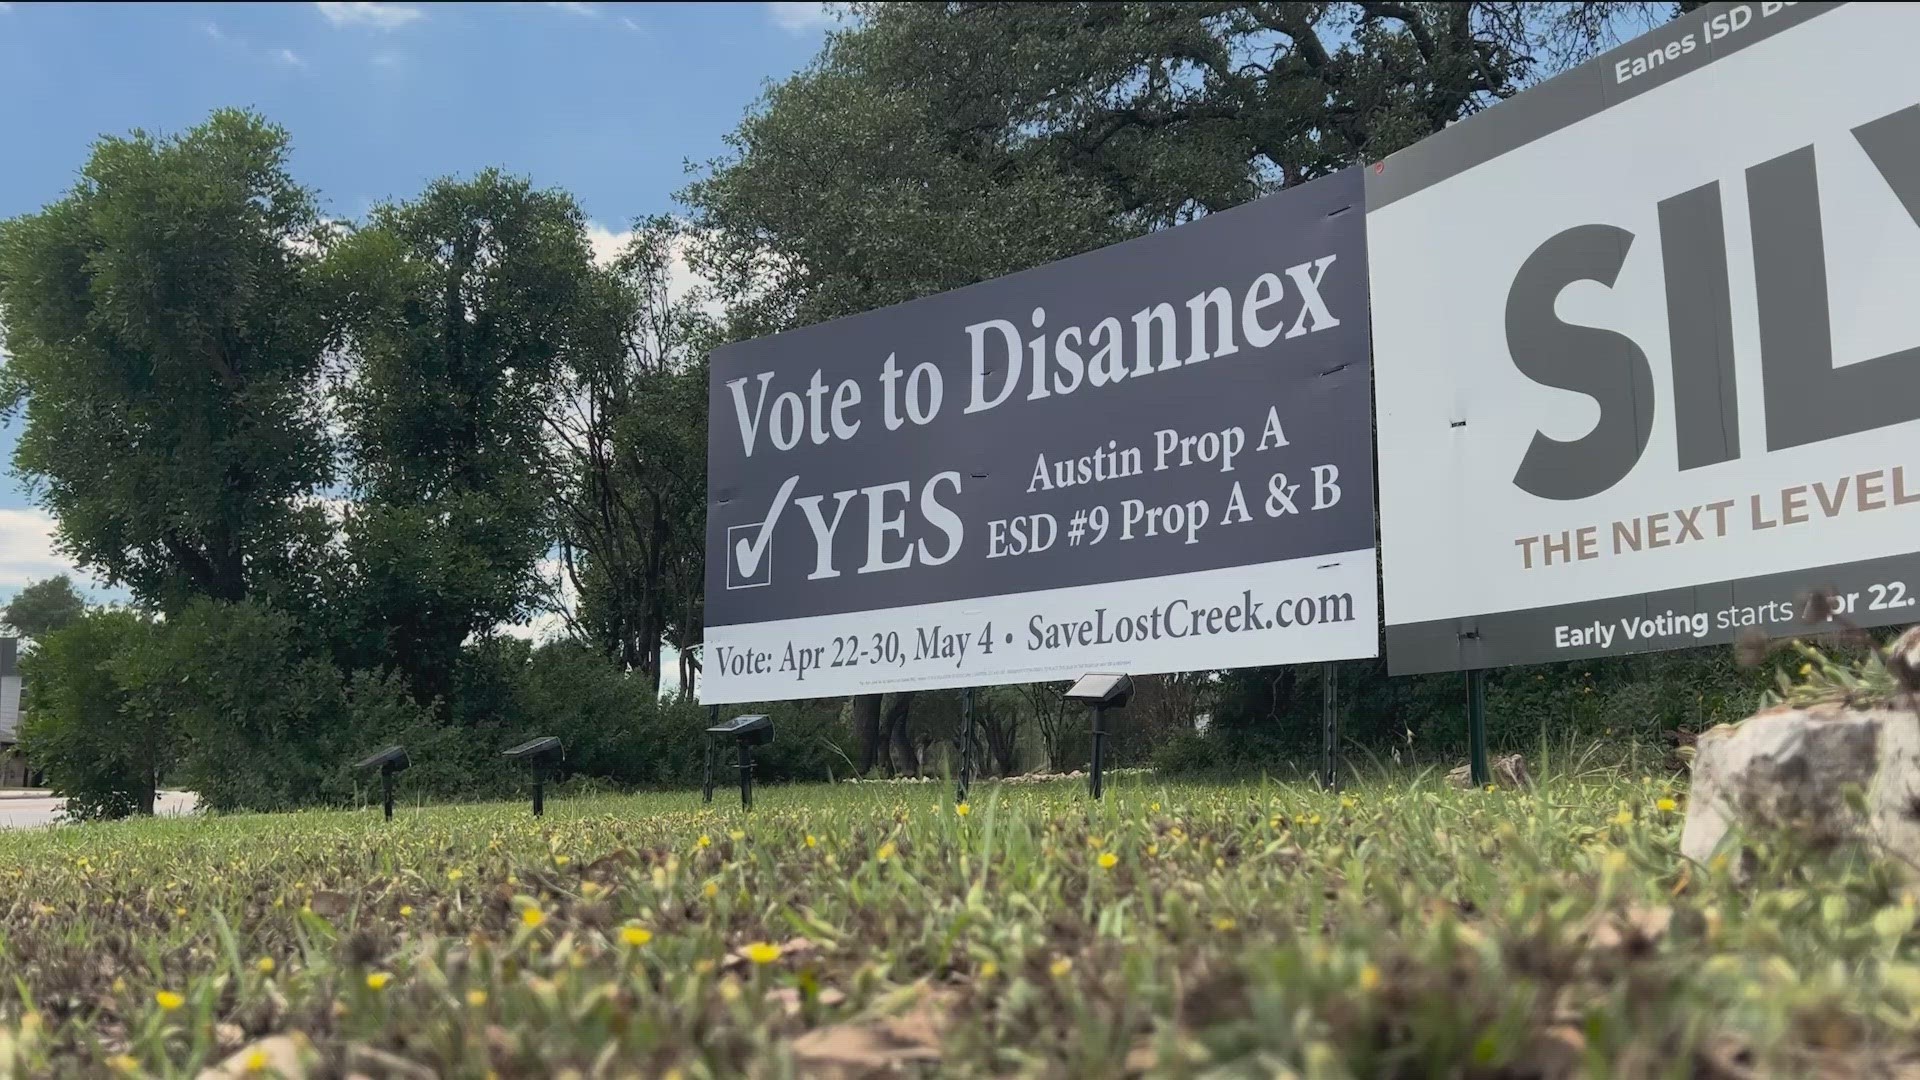 Lost Creek residents in southwest Austin say they're not getting sufficient city services. A ballot measure would allow the area to disannex.